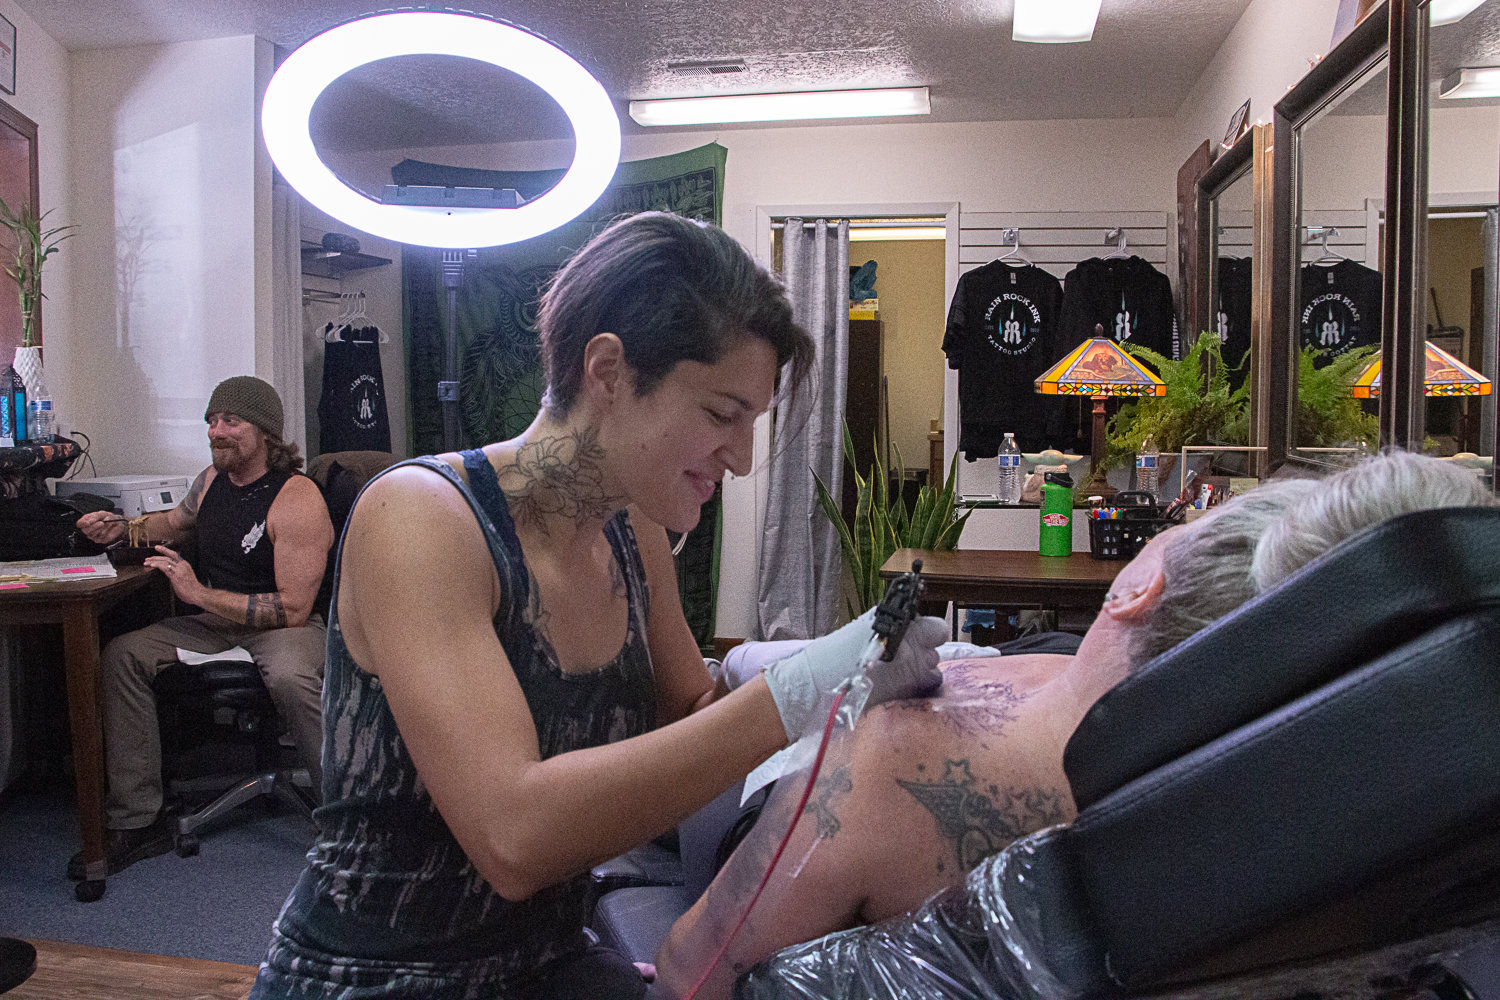 Jen McKay relaxes in the seat while tattoo artist Sarah Gootgeld continues working on a piece on her shoulder while Sarah's husband and receptionist, Eli Gootgeld, enjoys a snack in the back.